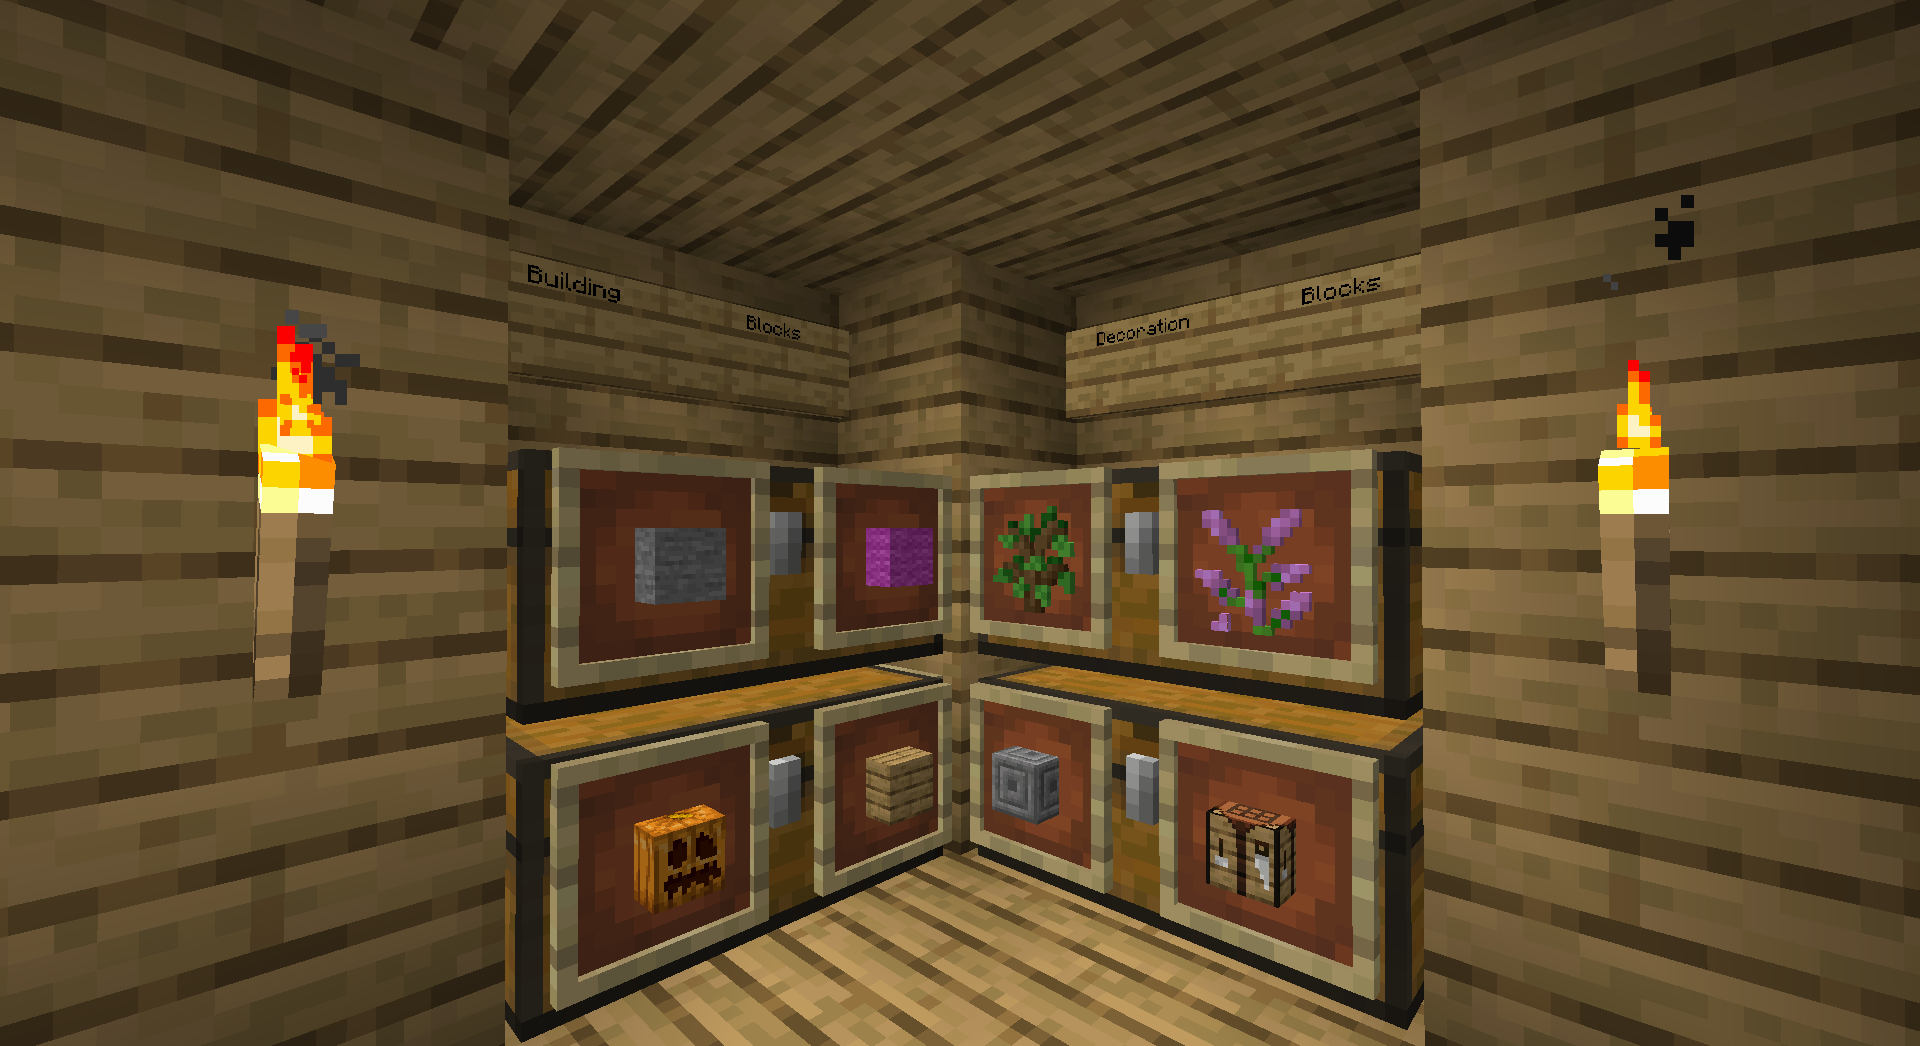 I finally optimised and organize my enderchest and now if I need